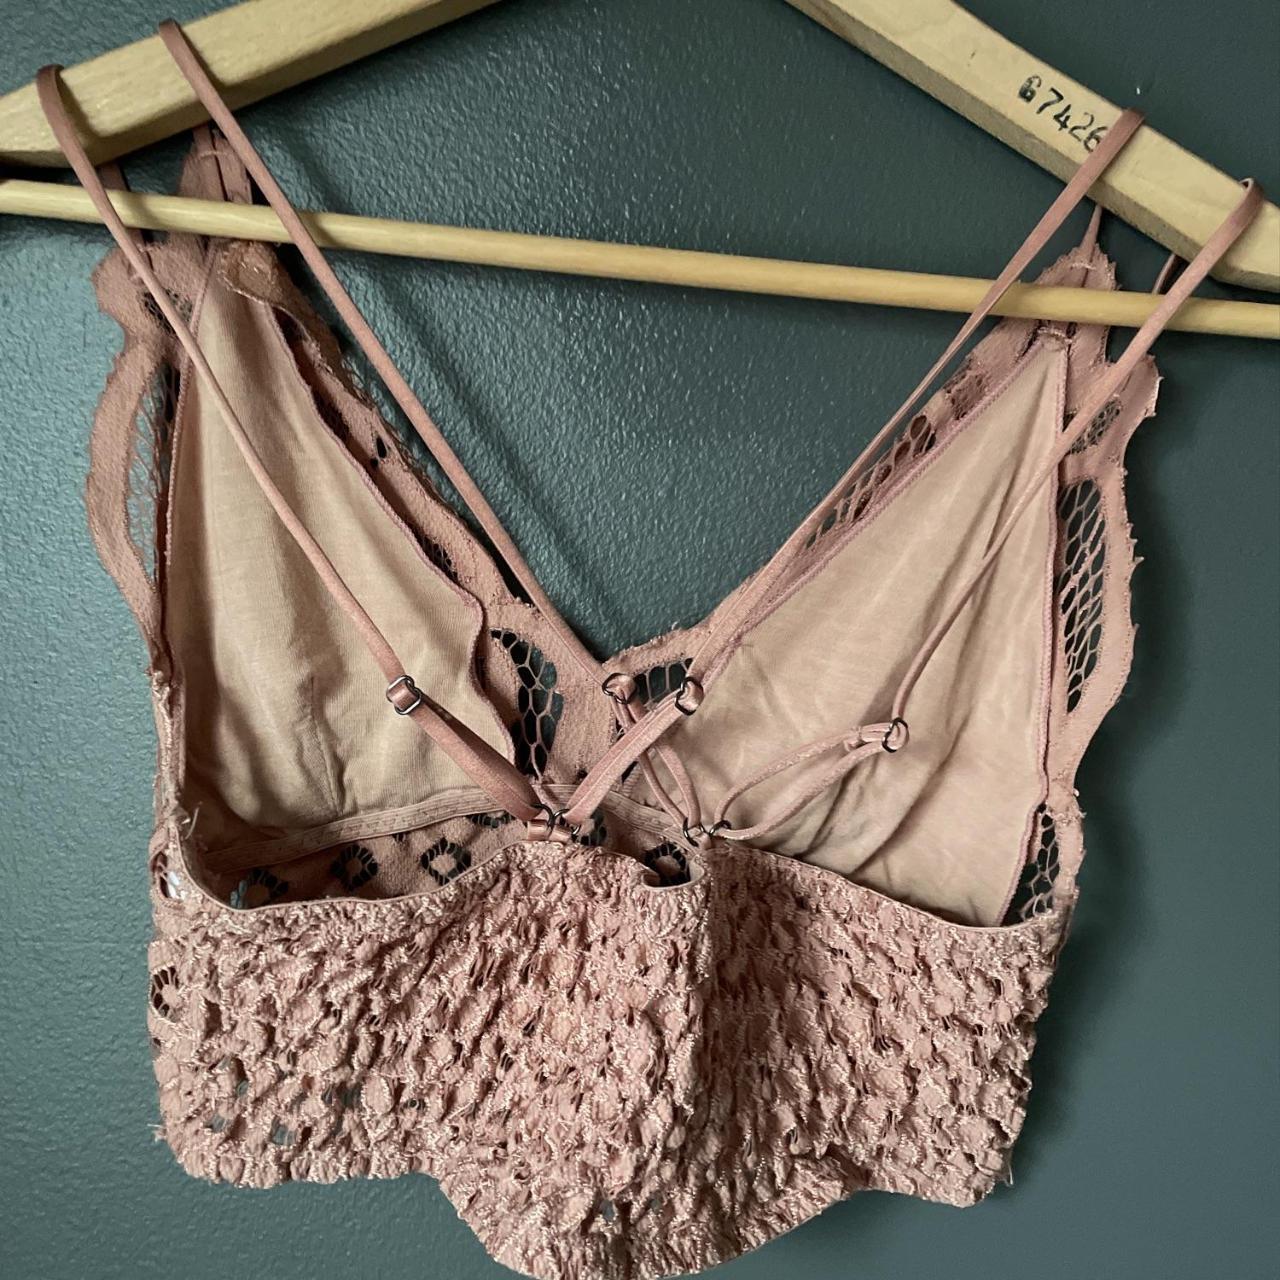 Product Image 3 - Bralette Pink Sz S

Perfect lace